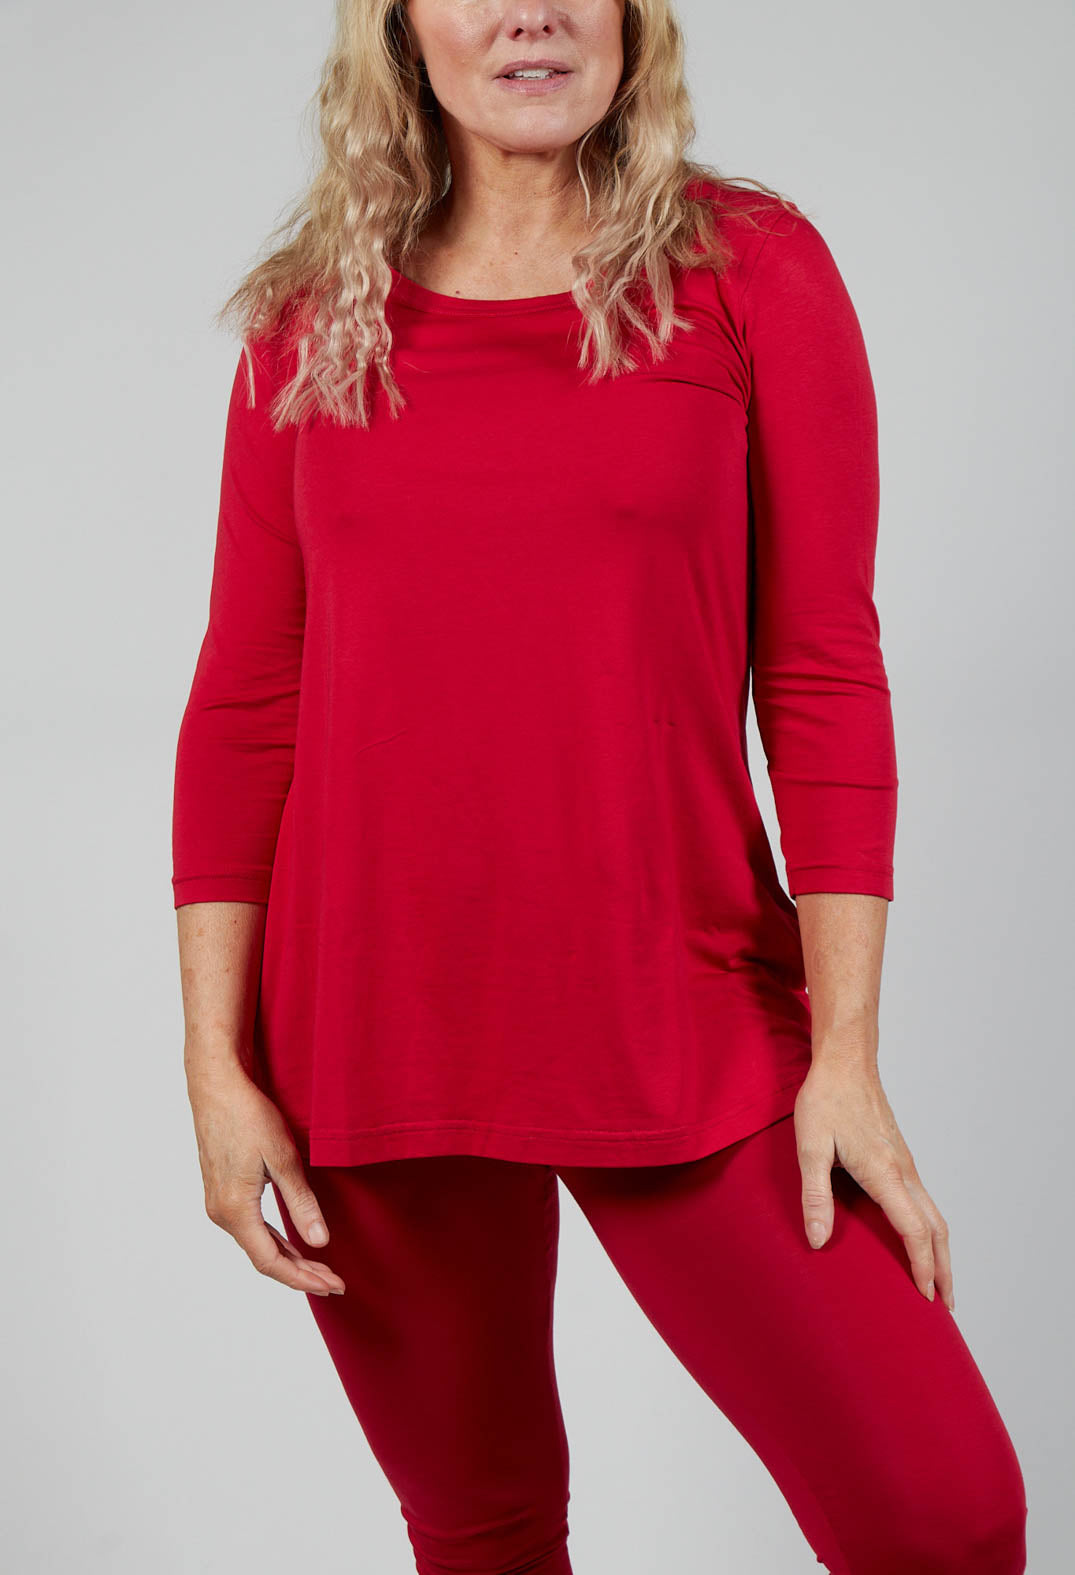 Cropped Sleeve Jersey Top in Chili